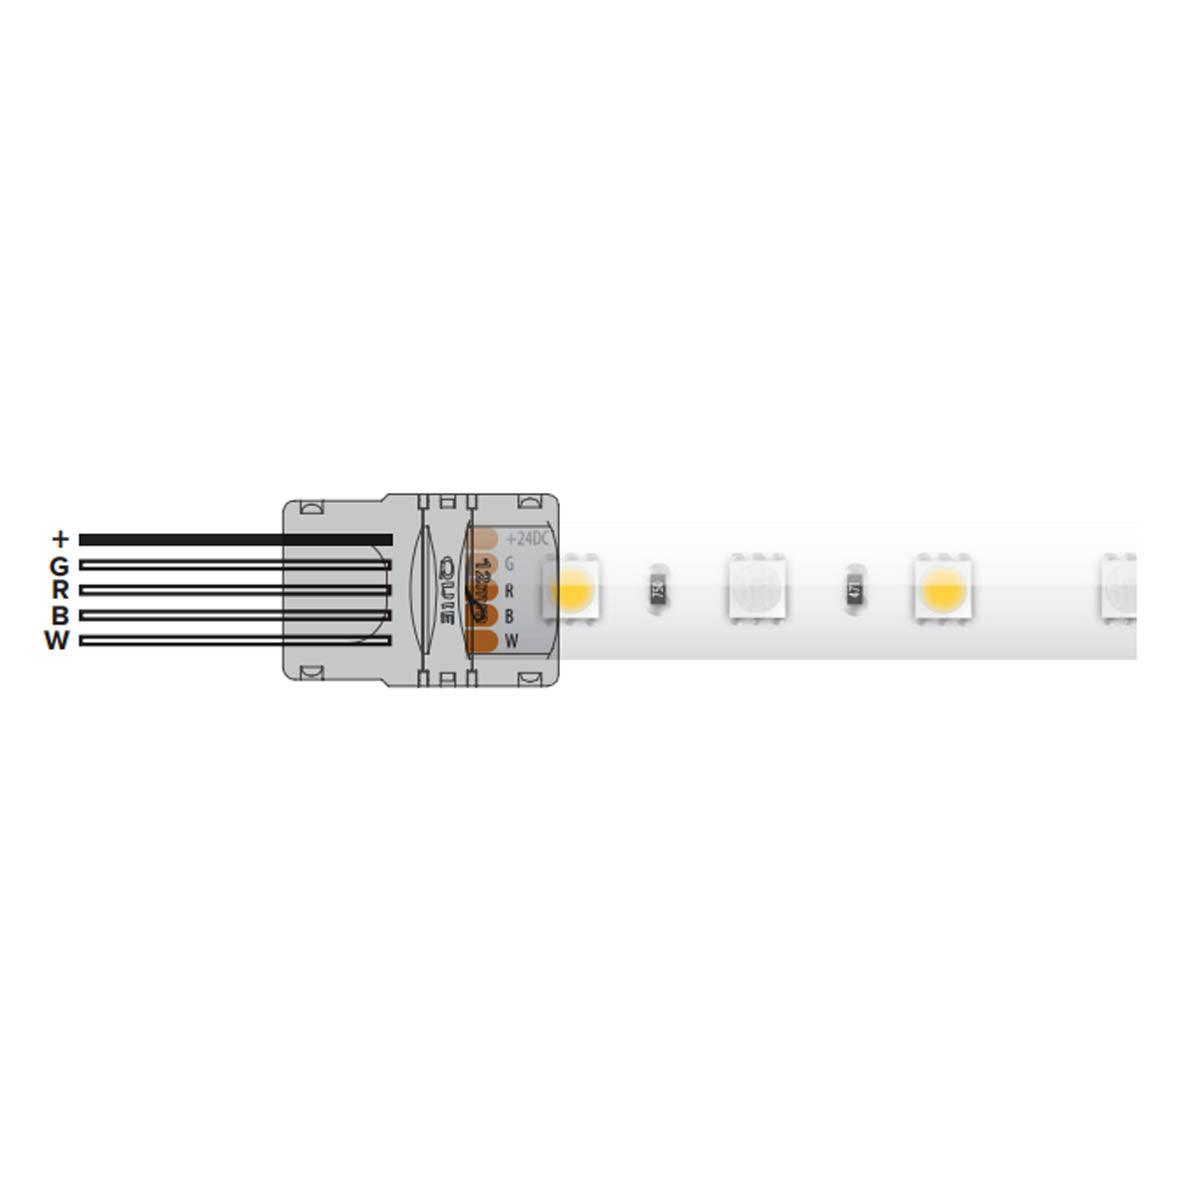 Trulink Tape to Tape Splice Connector, 5 Wire, IP20 Rated - Bees Lighting